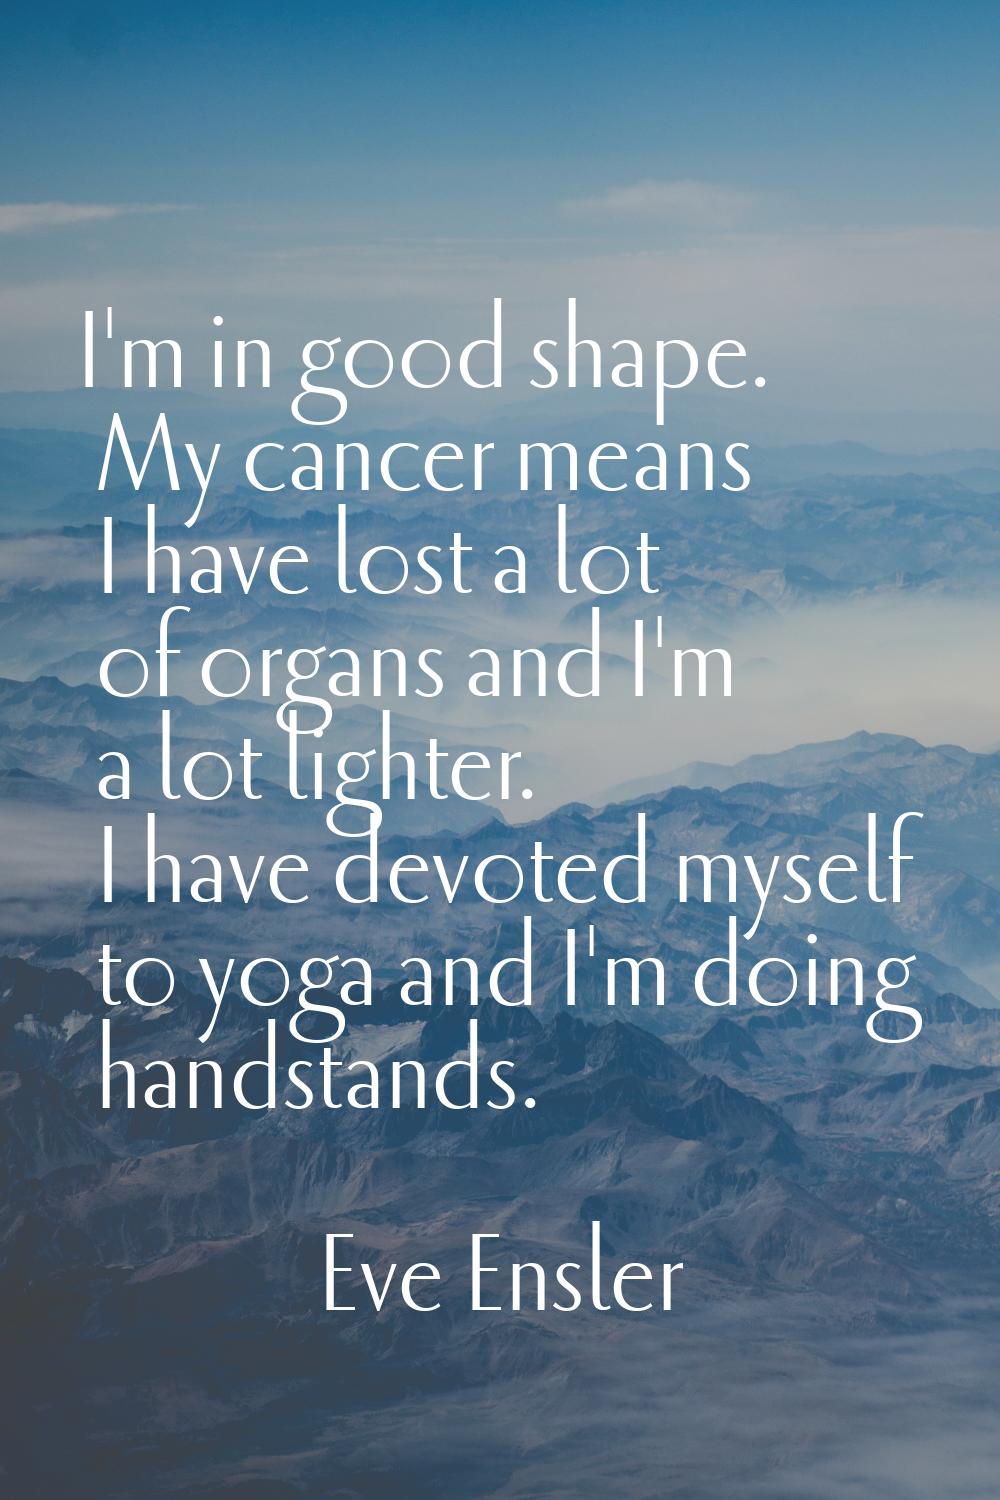 I'm in good shape. My cancer means I have lost a lot of organs and I'm a lot lighter. I have devote